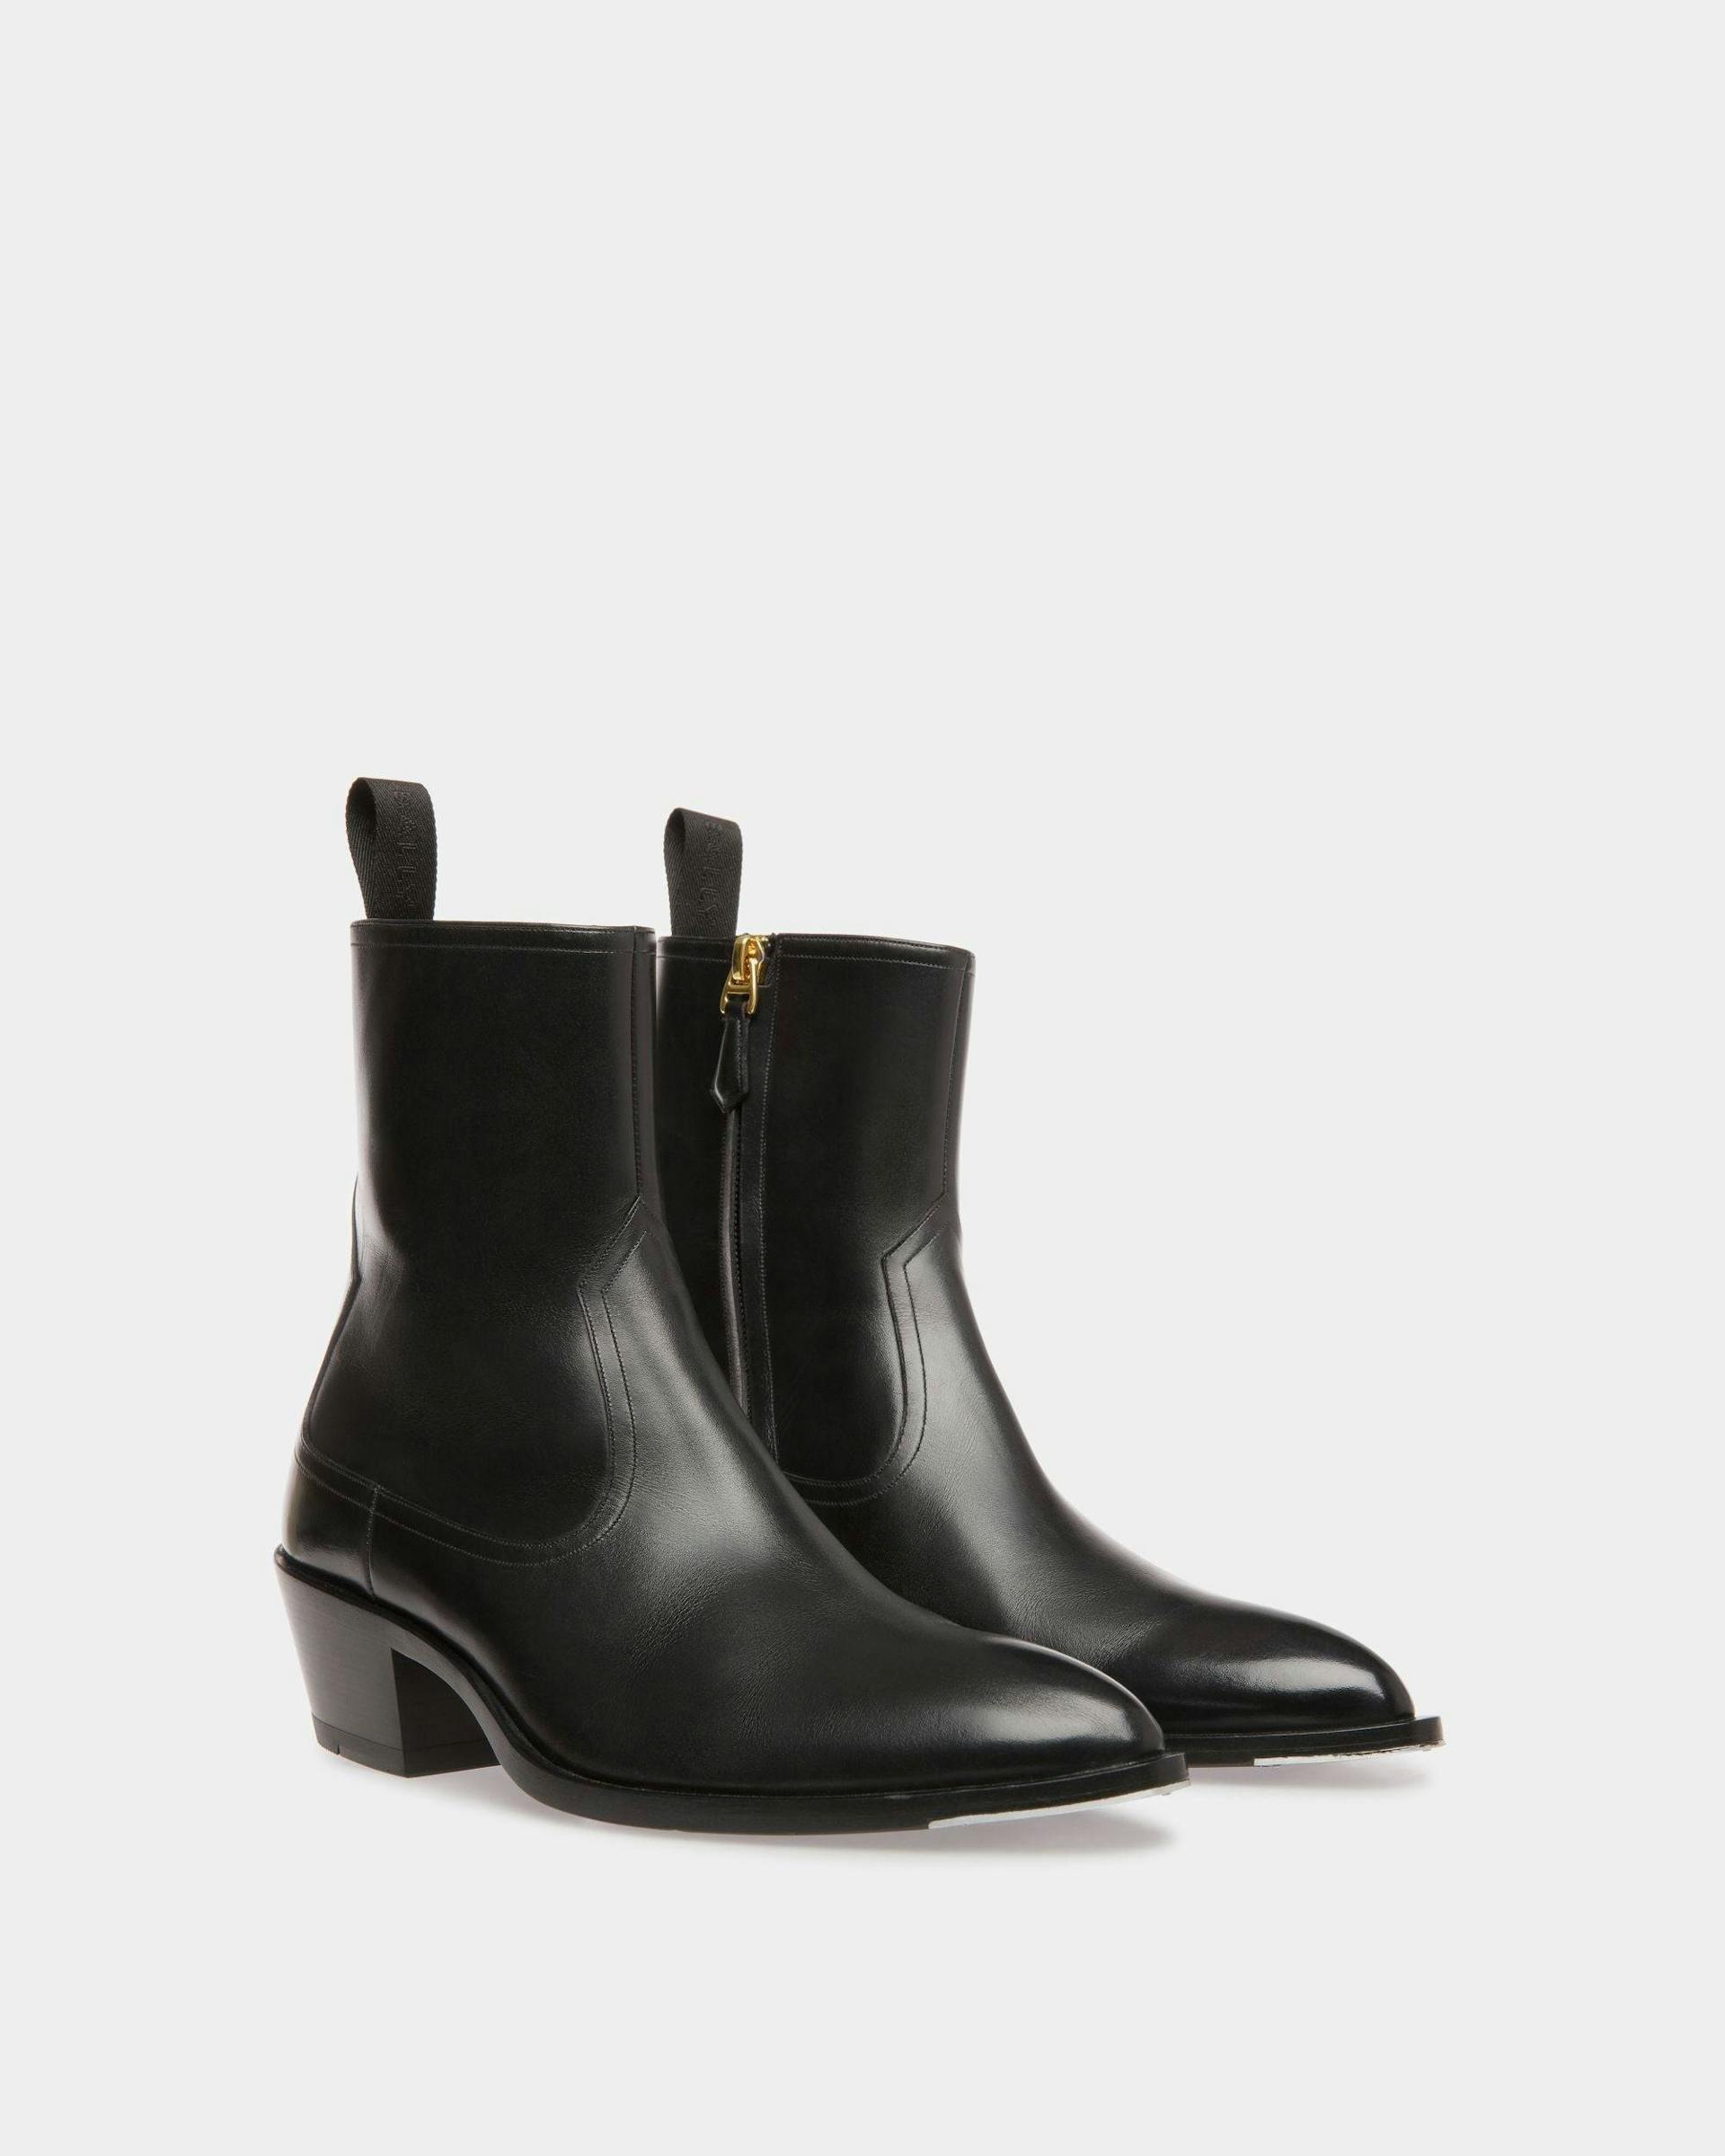 Women's Vegas Boots In Black Leather | Bally | Still Life 3/4 Front